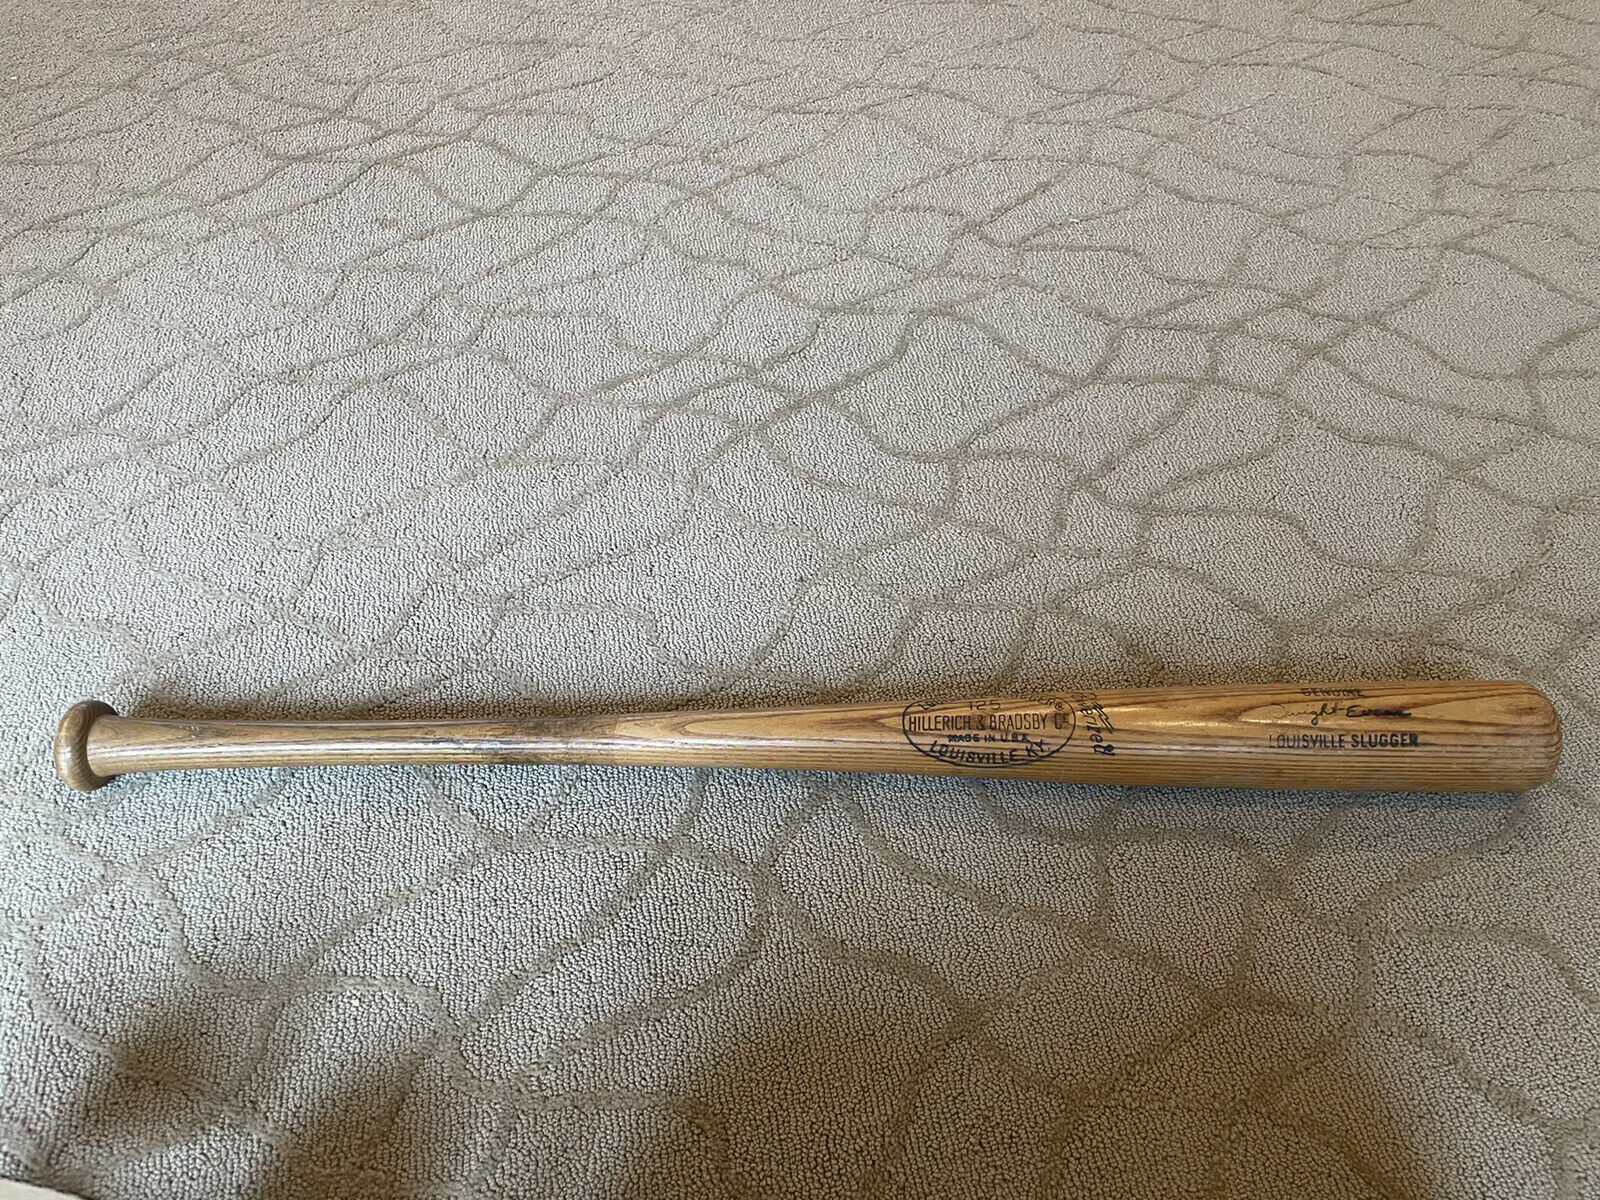 Dwight Evans game used bat cracked 